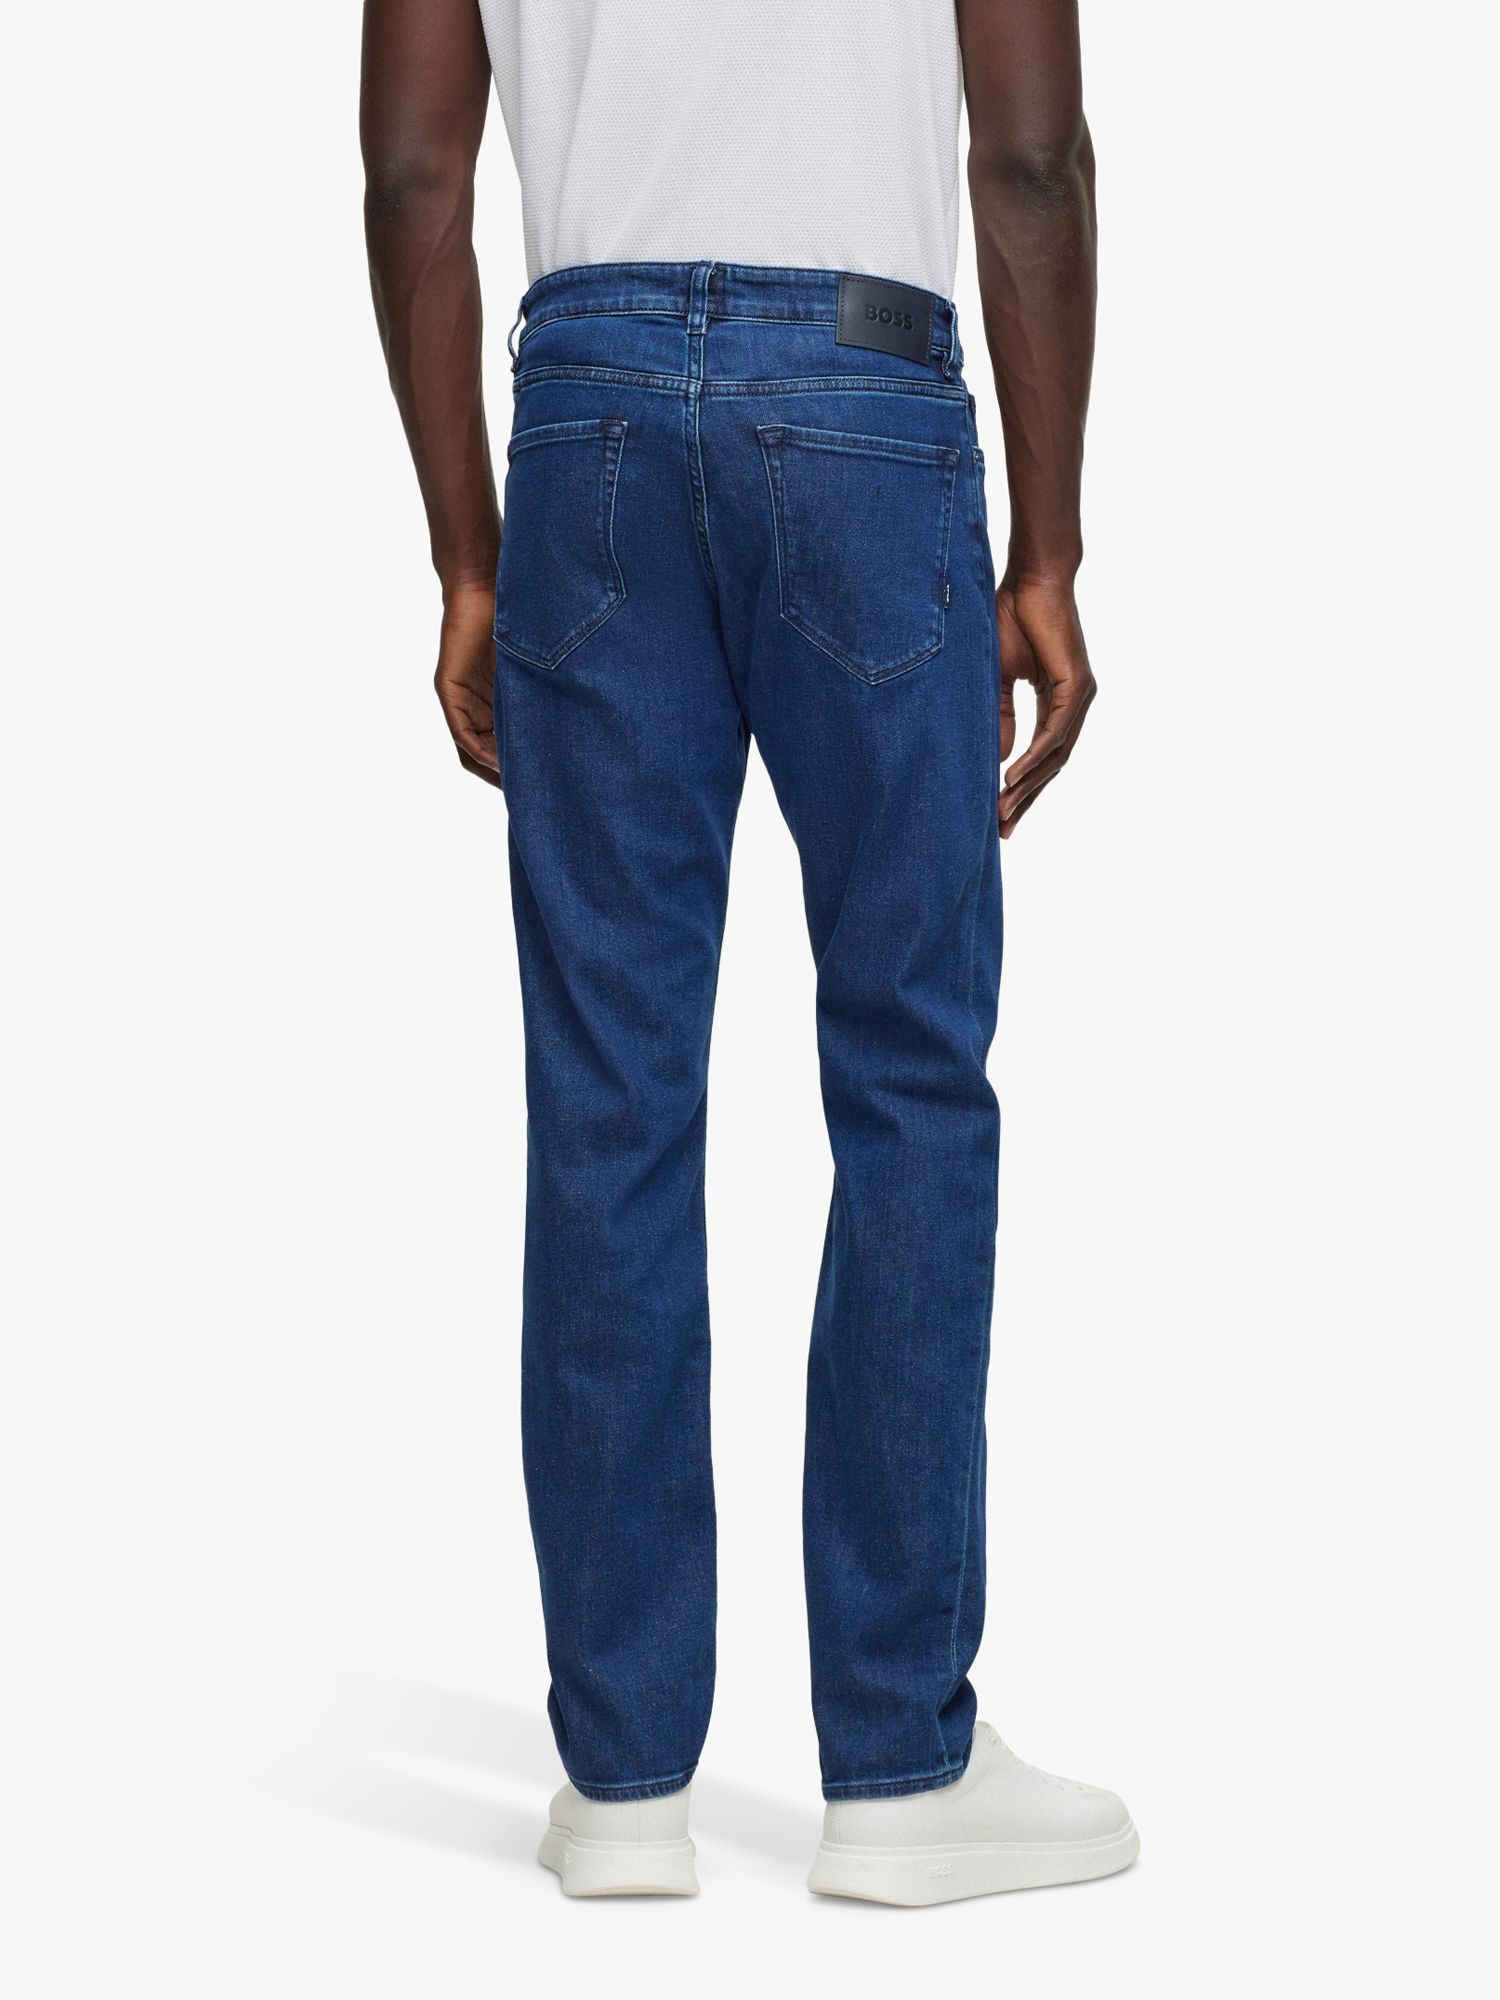 BOSS Maine3 Regular Fit Stretch Cotton Jeans, Bright Blue at John Lewis ...